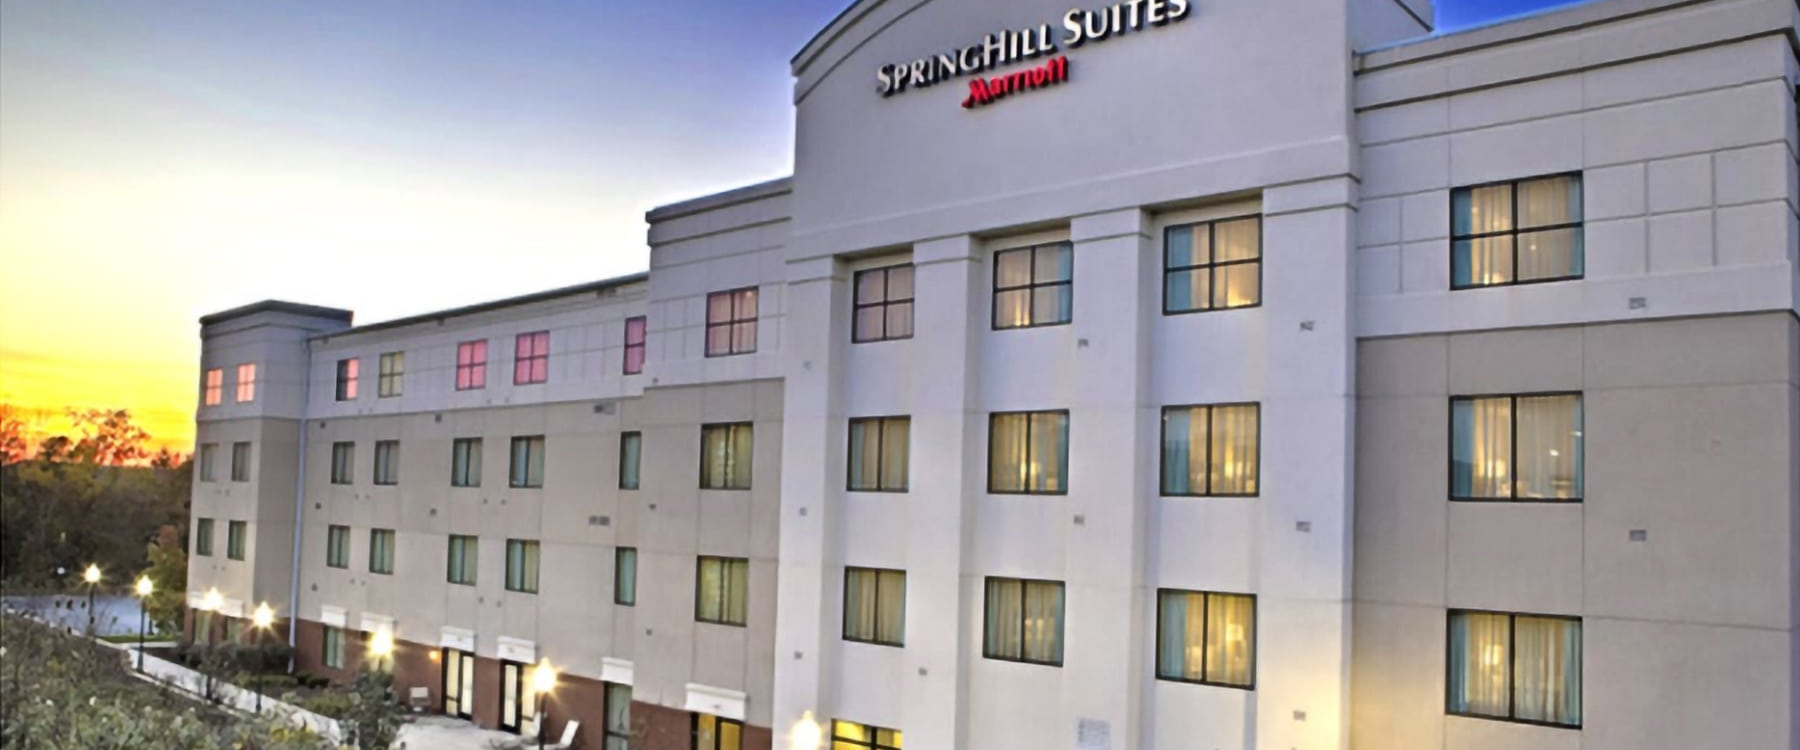 SpringHill Suites by Marriott Dayton